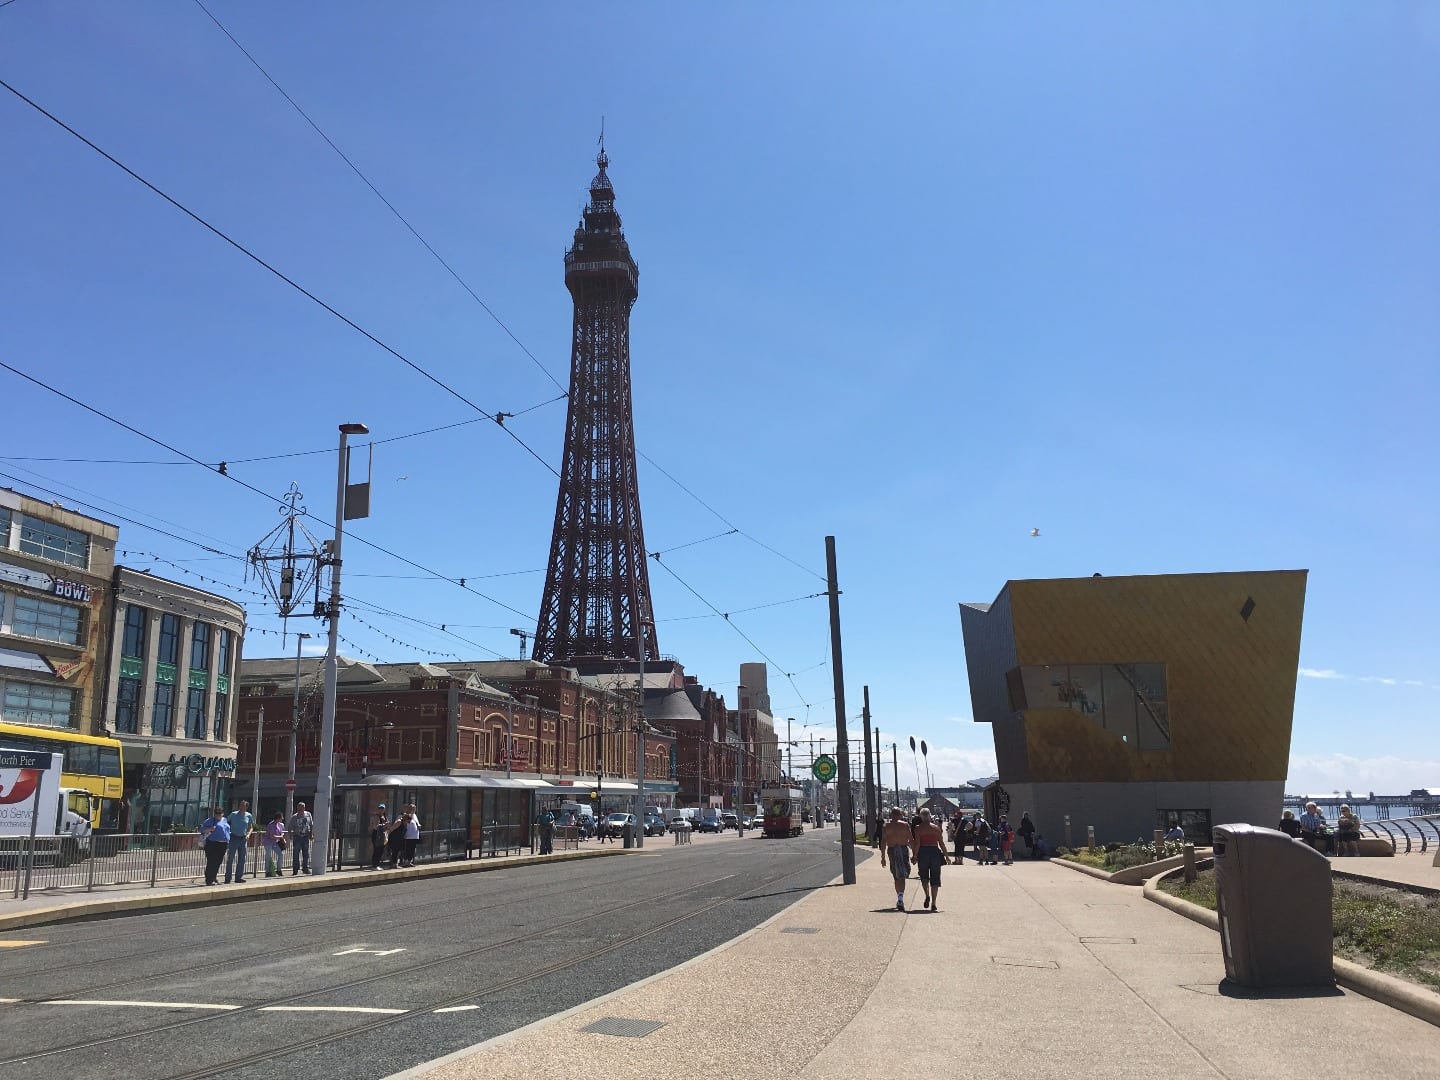 Cleaning up Blackpool - there are plenty of bins